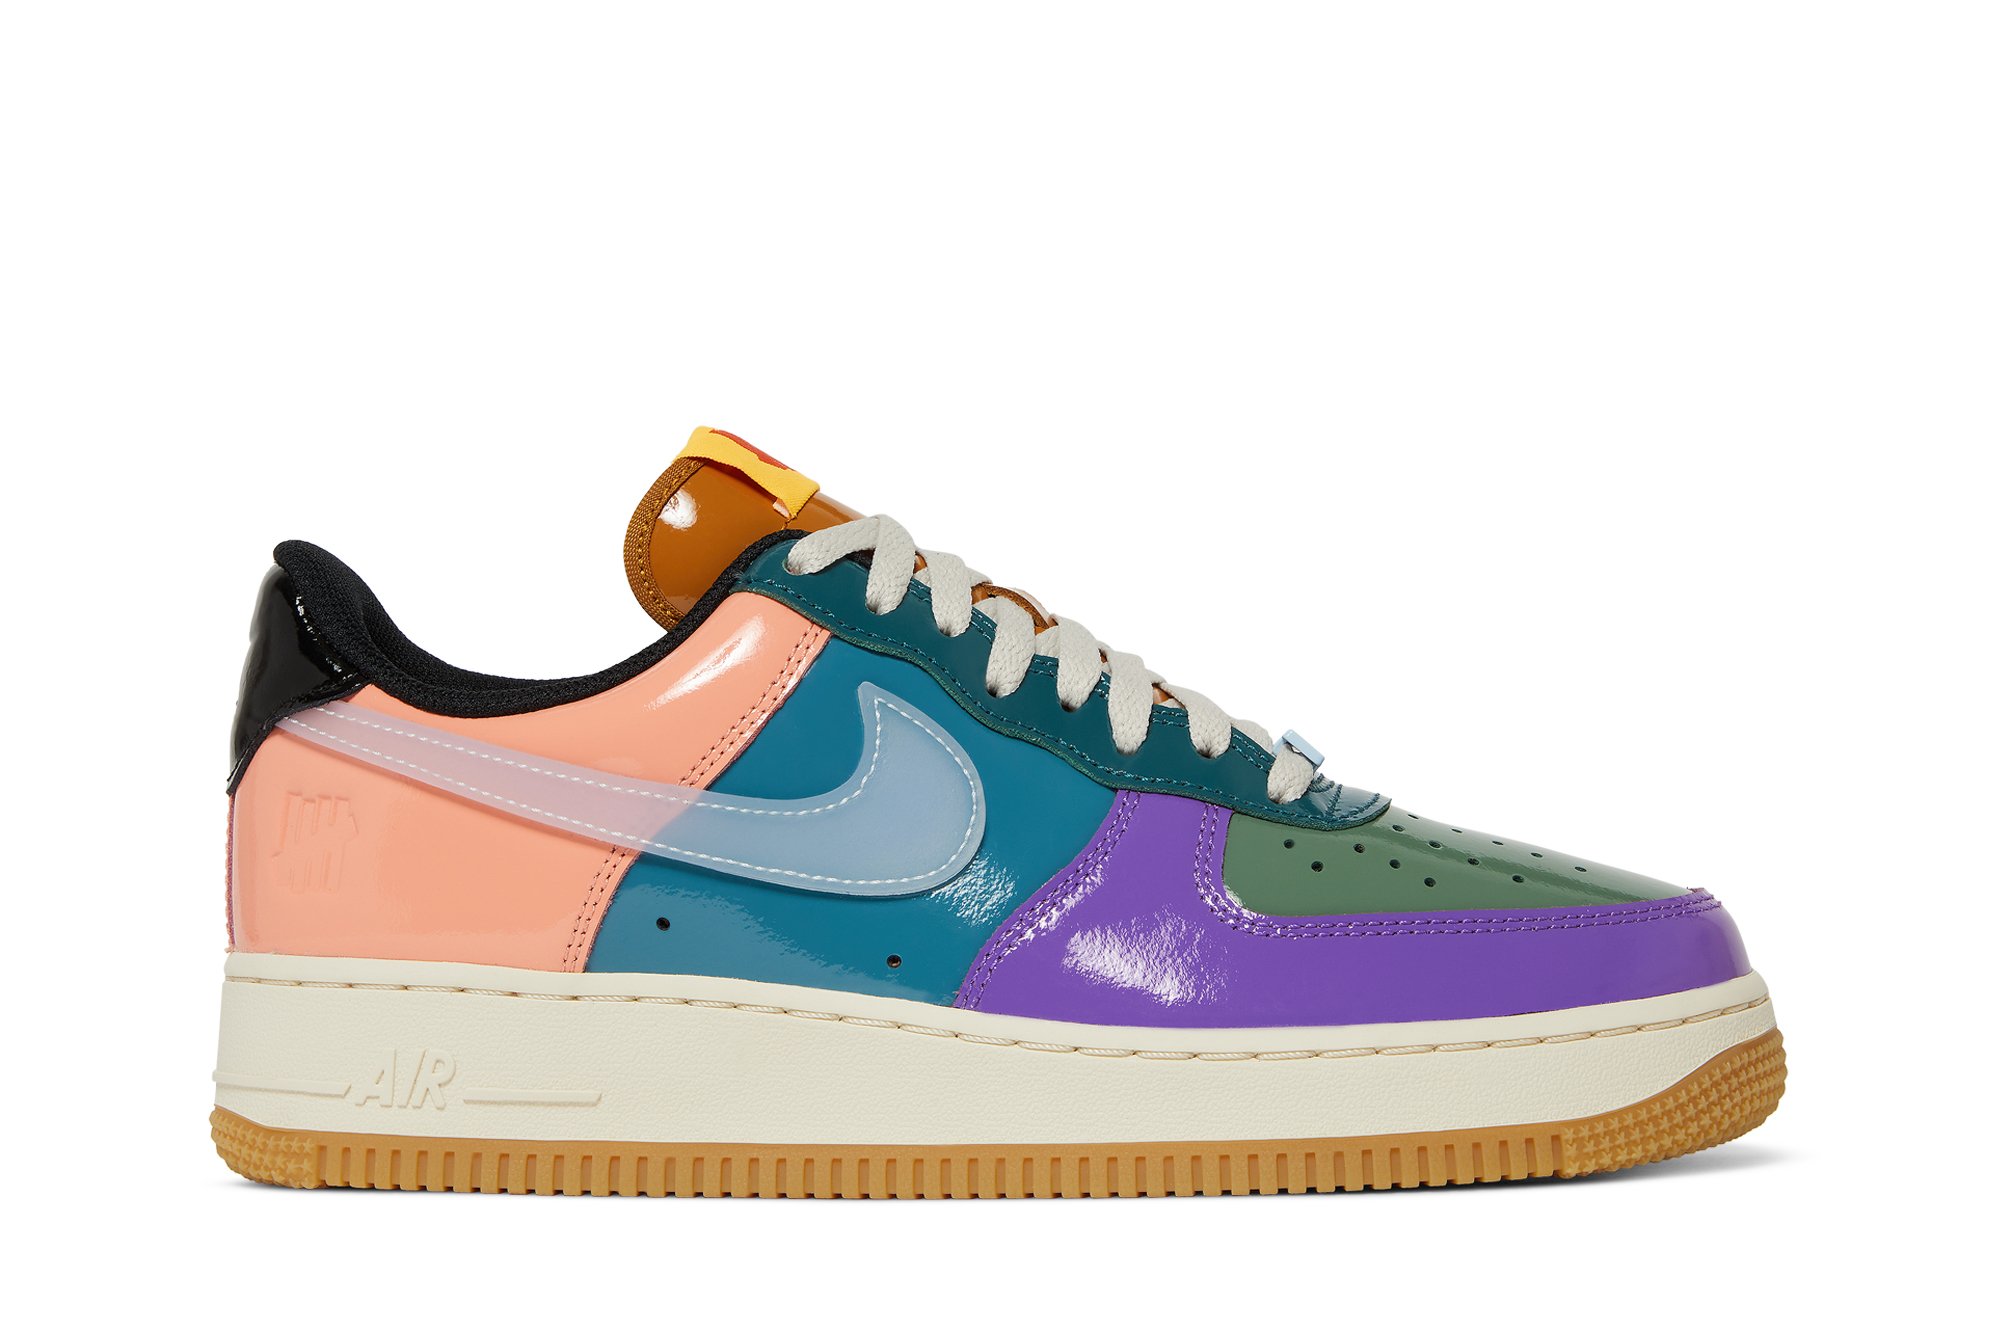 Undefeated x Air Force 1 Low 'Celestine Blue'